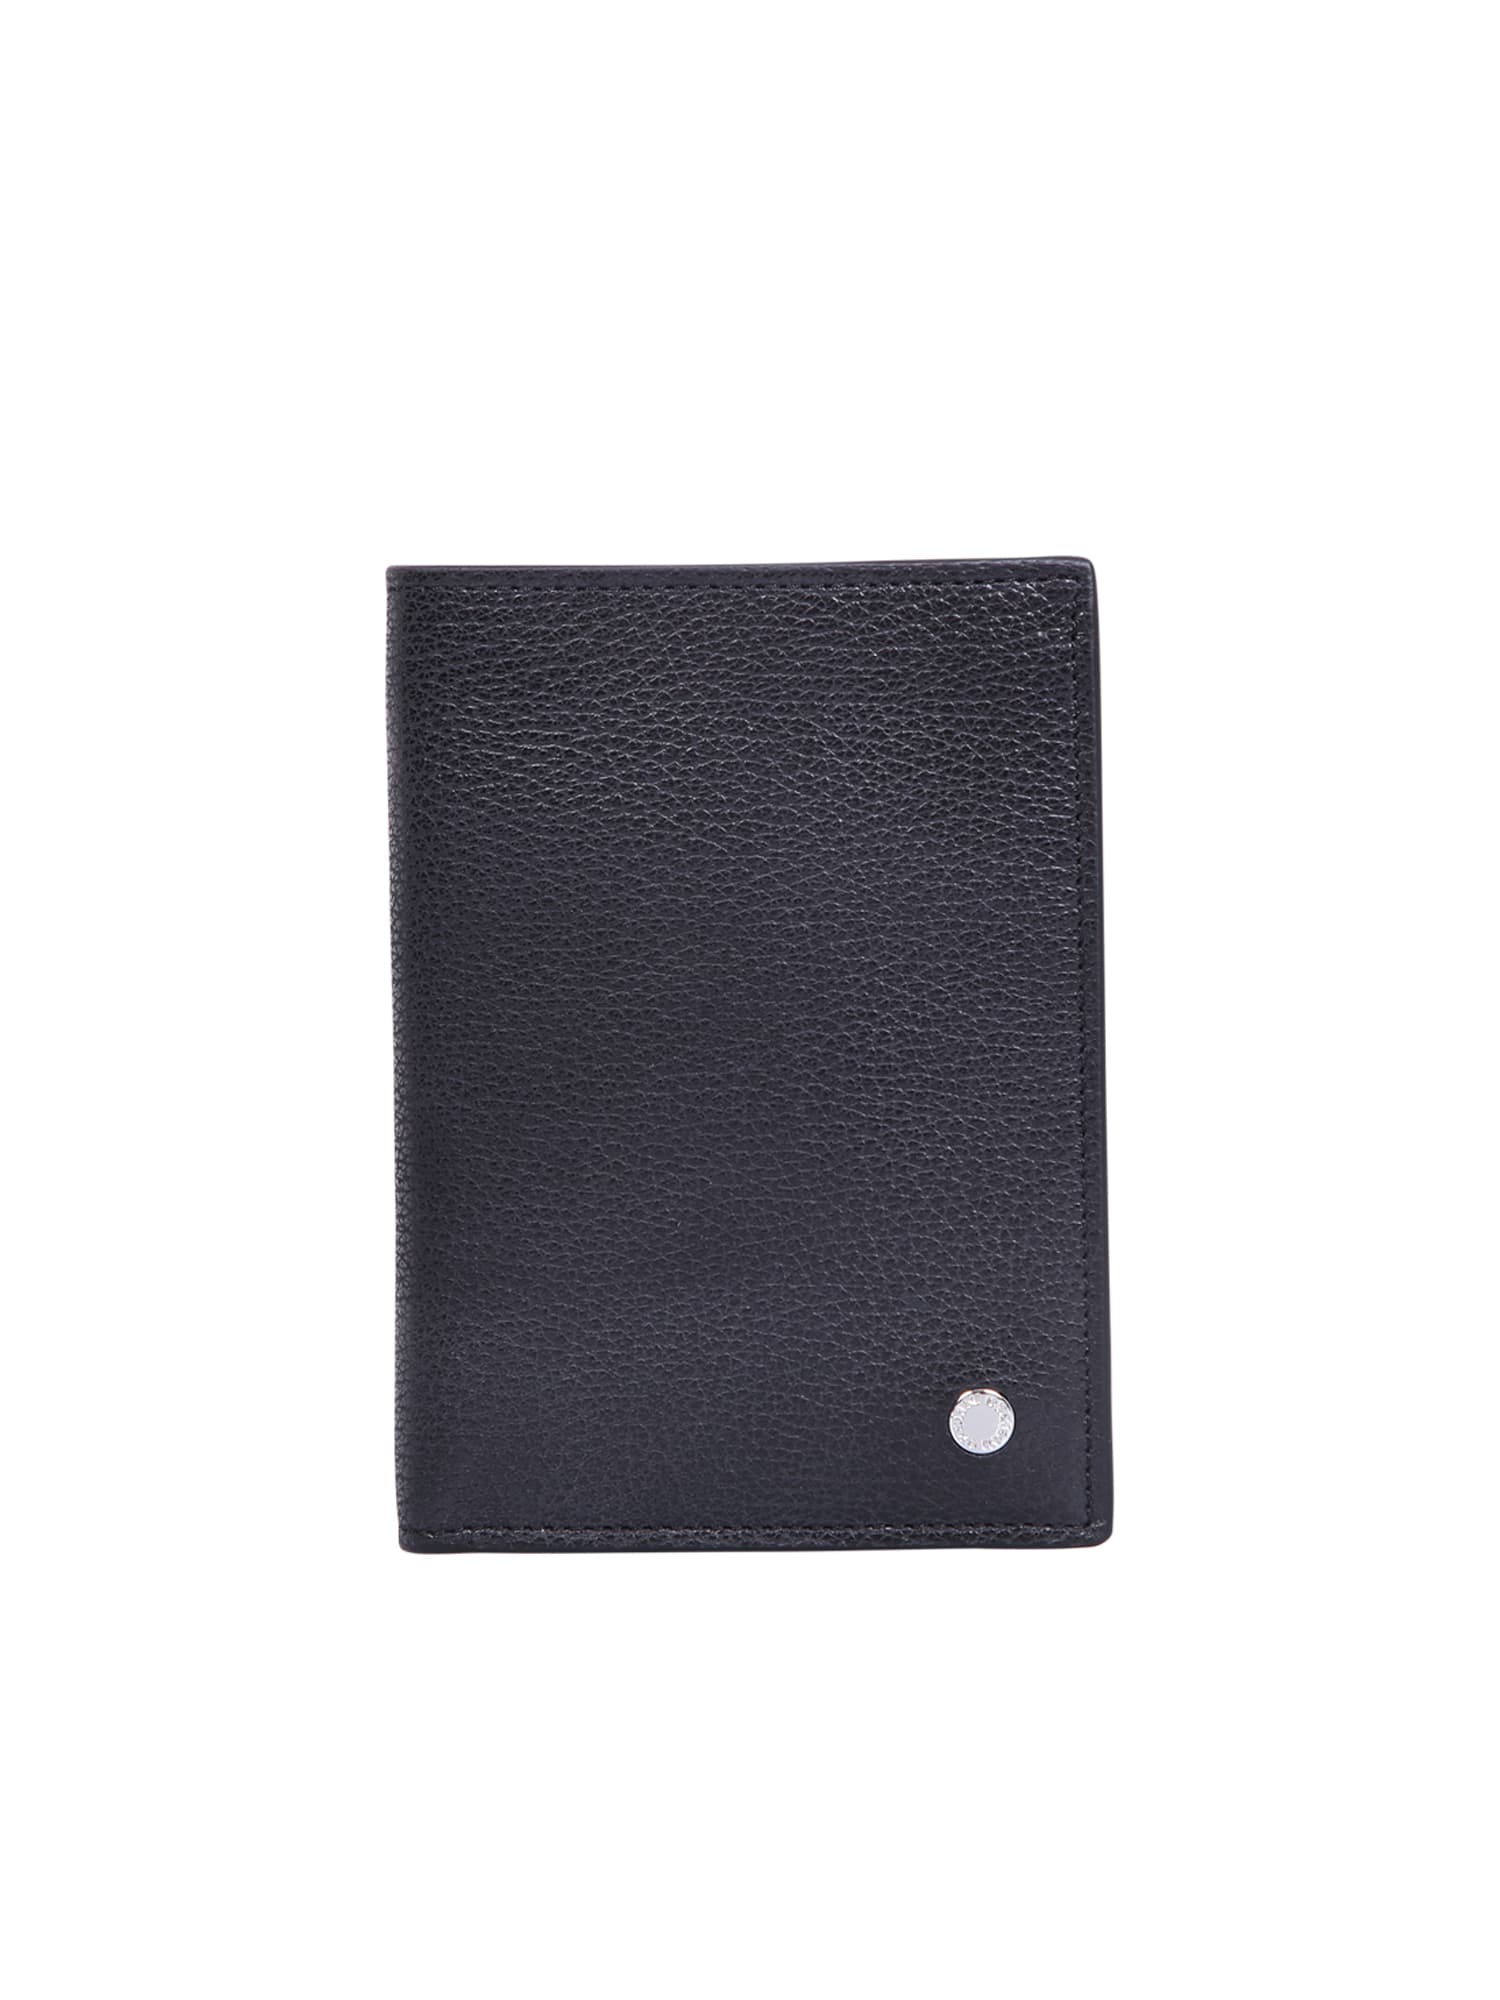 Orciani Micron Leather Wallet